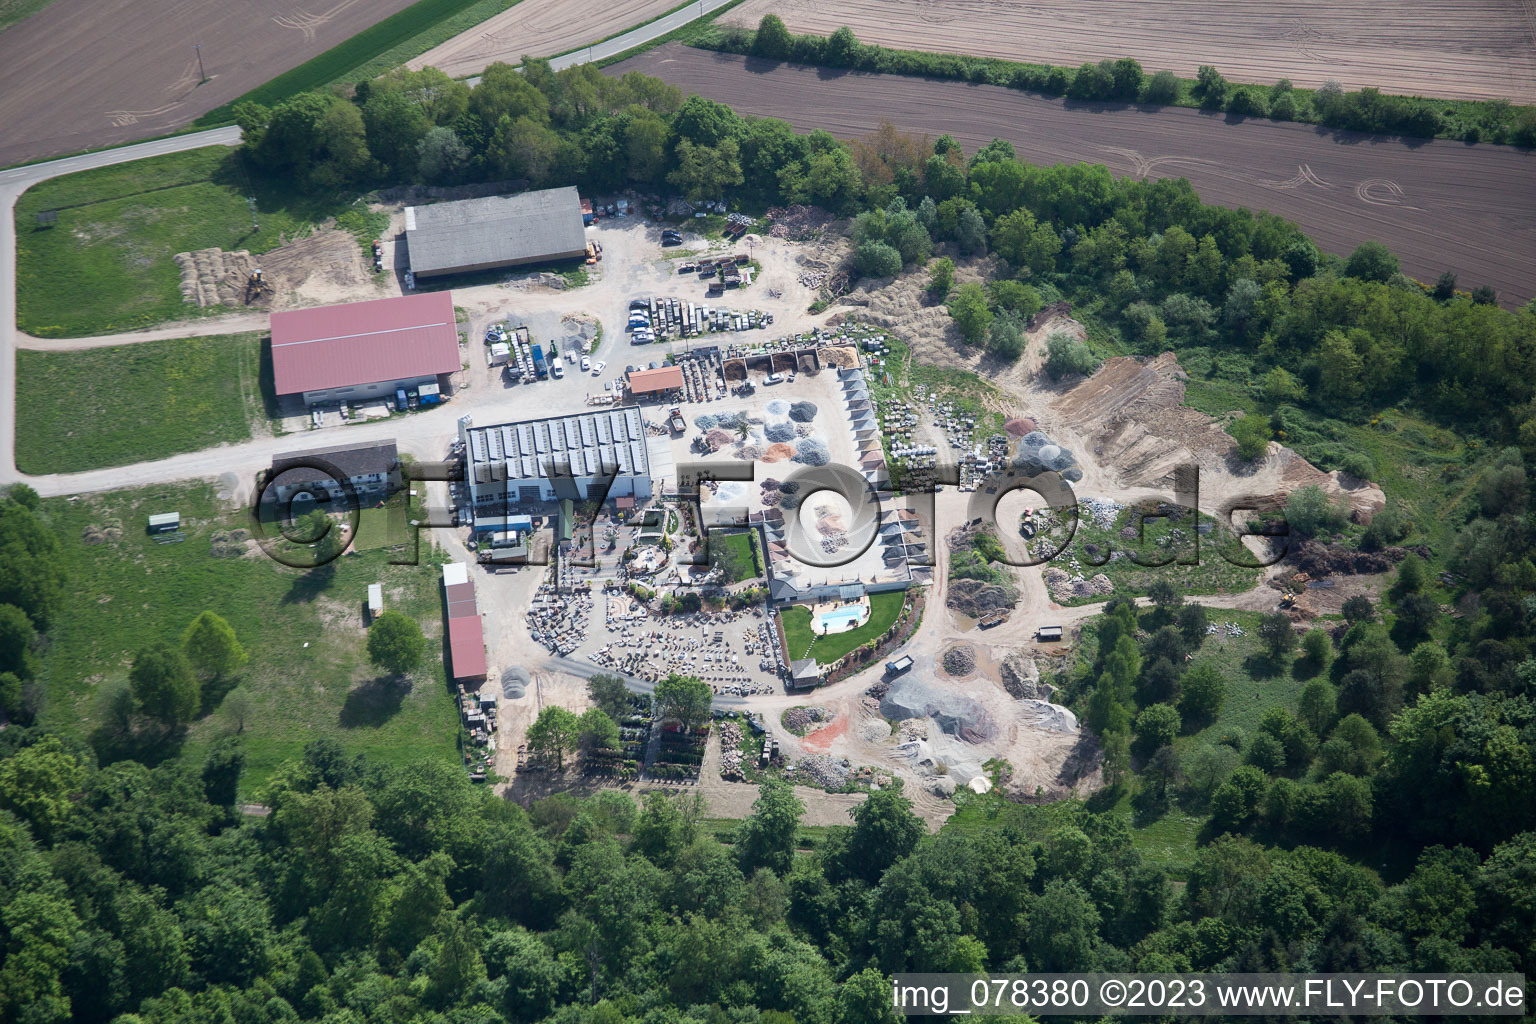 Palatinum landscape and garden design in Hagenbach in the state Rhineland-Palatinate, Germany out of the air